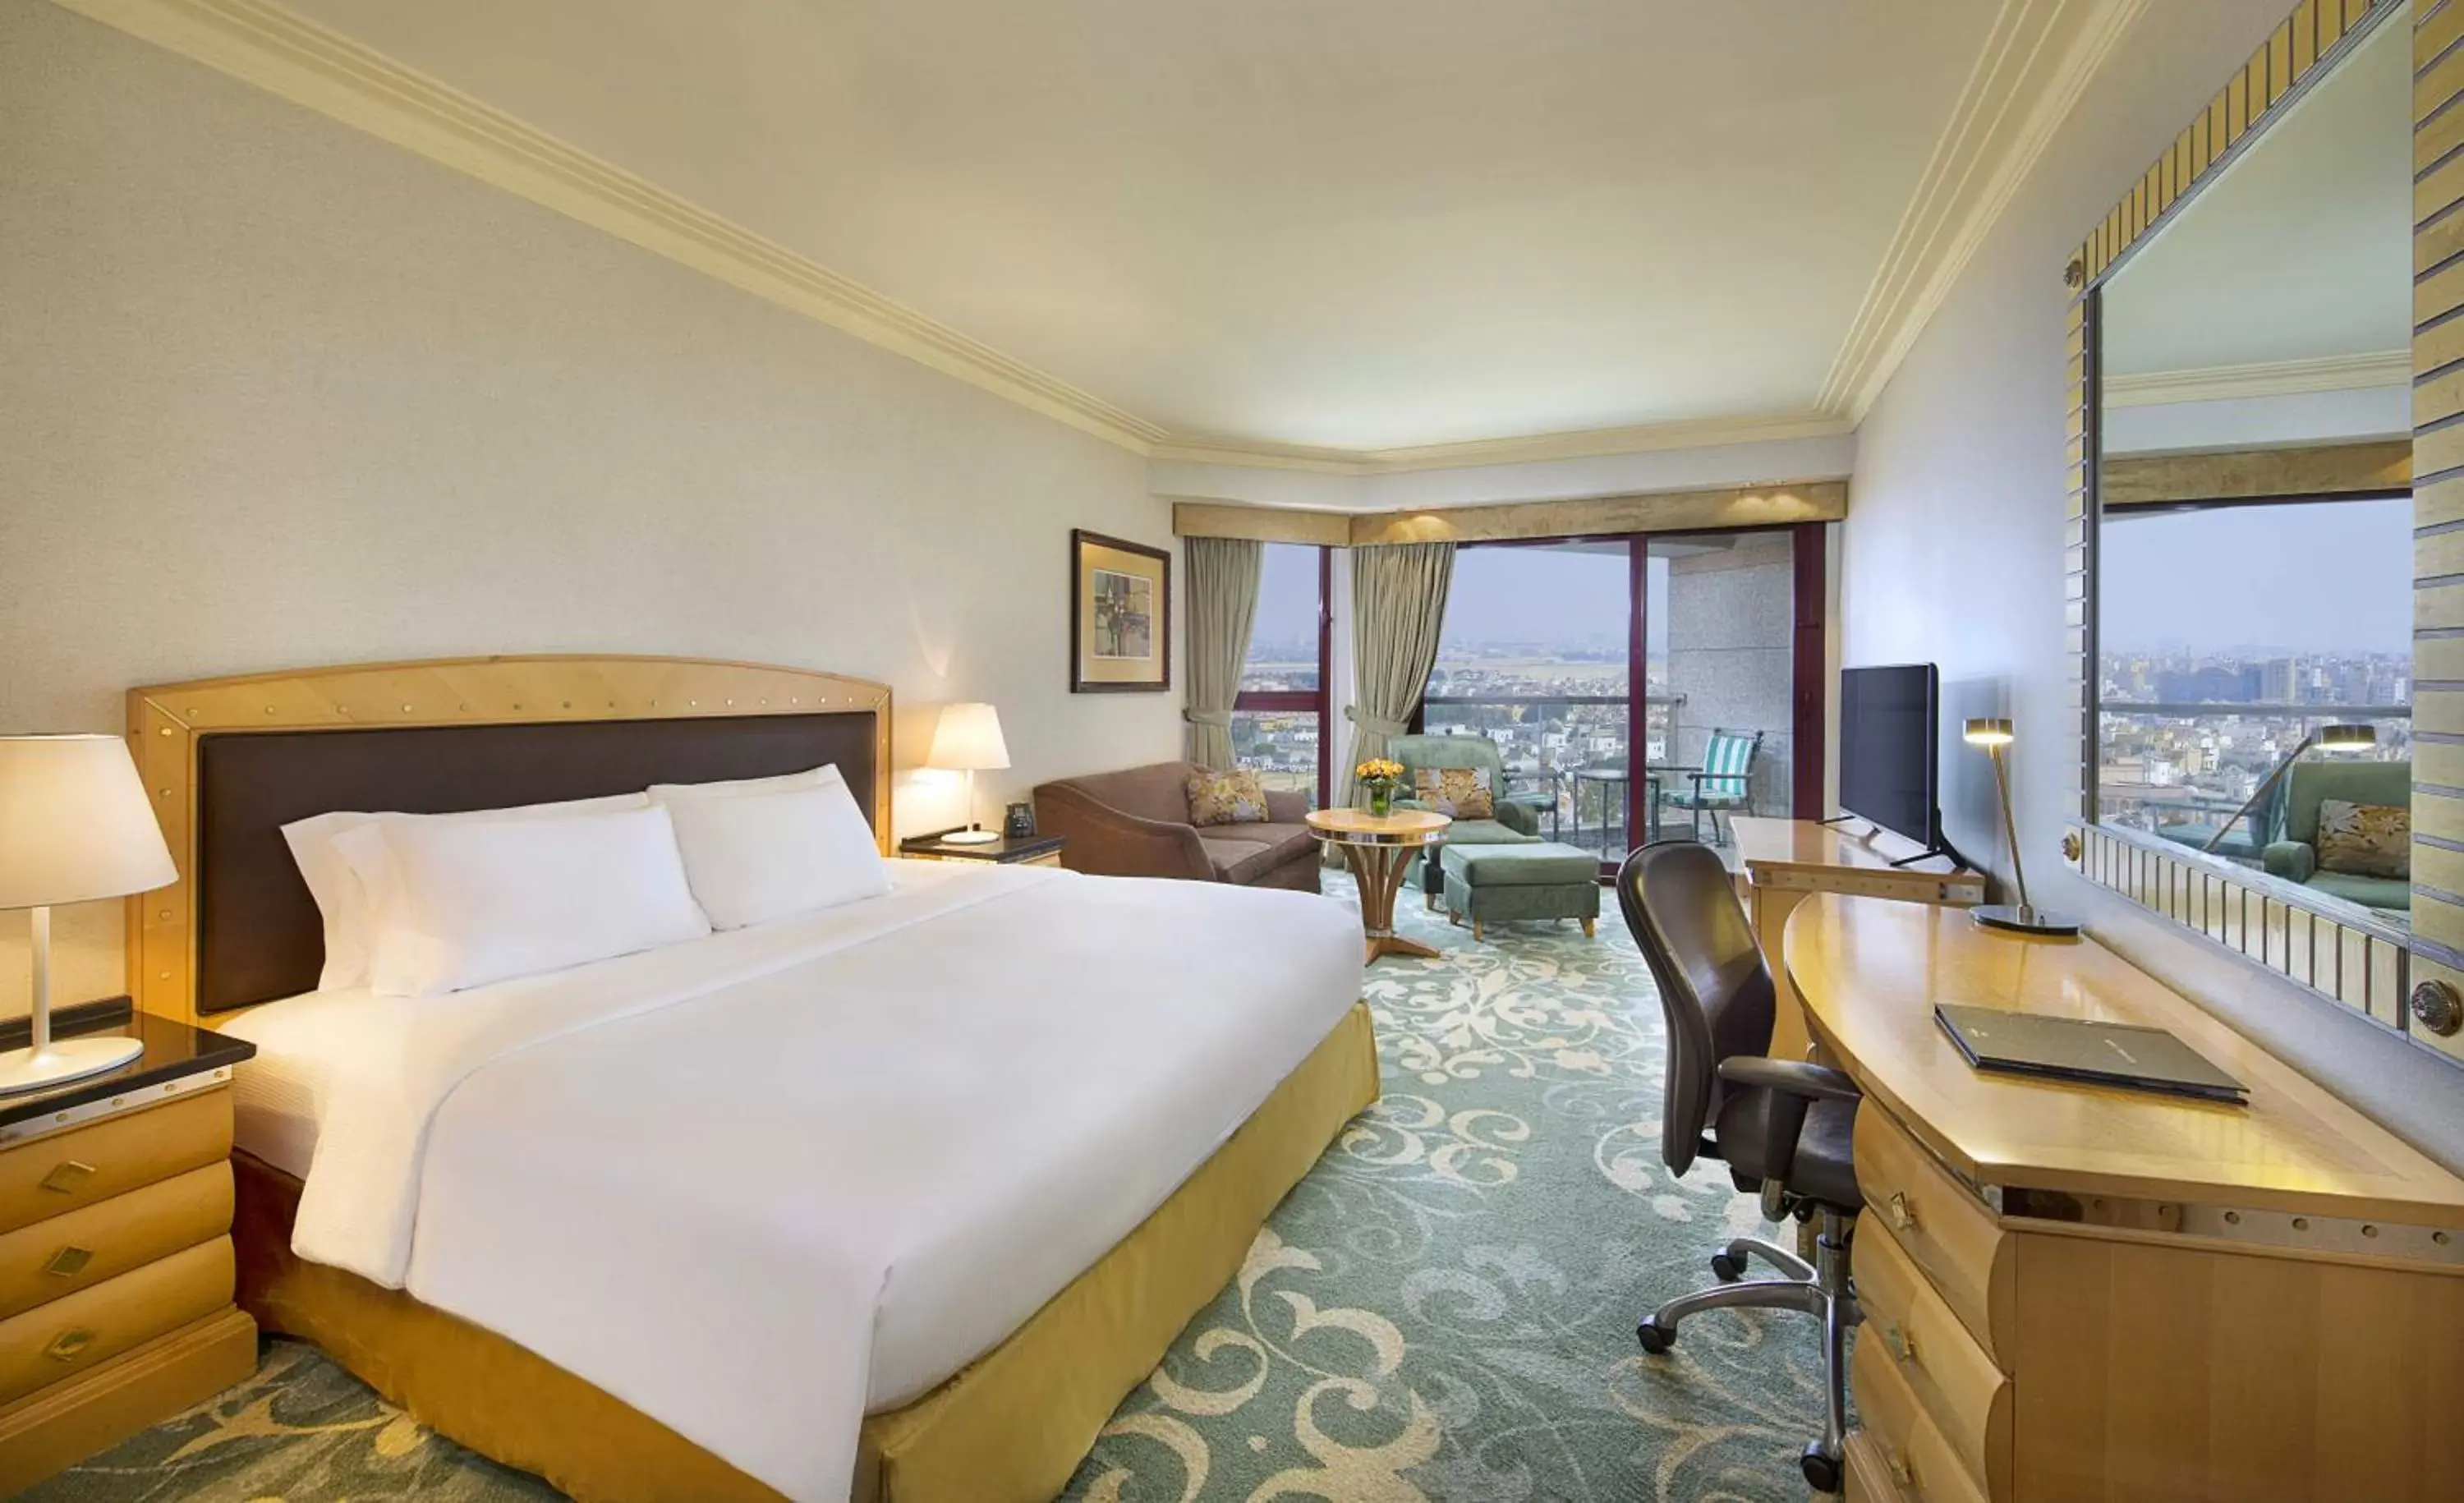 Deluxe King Room with City View in Jeddah Hilton